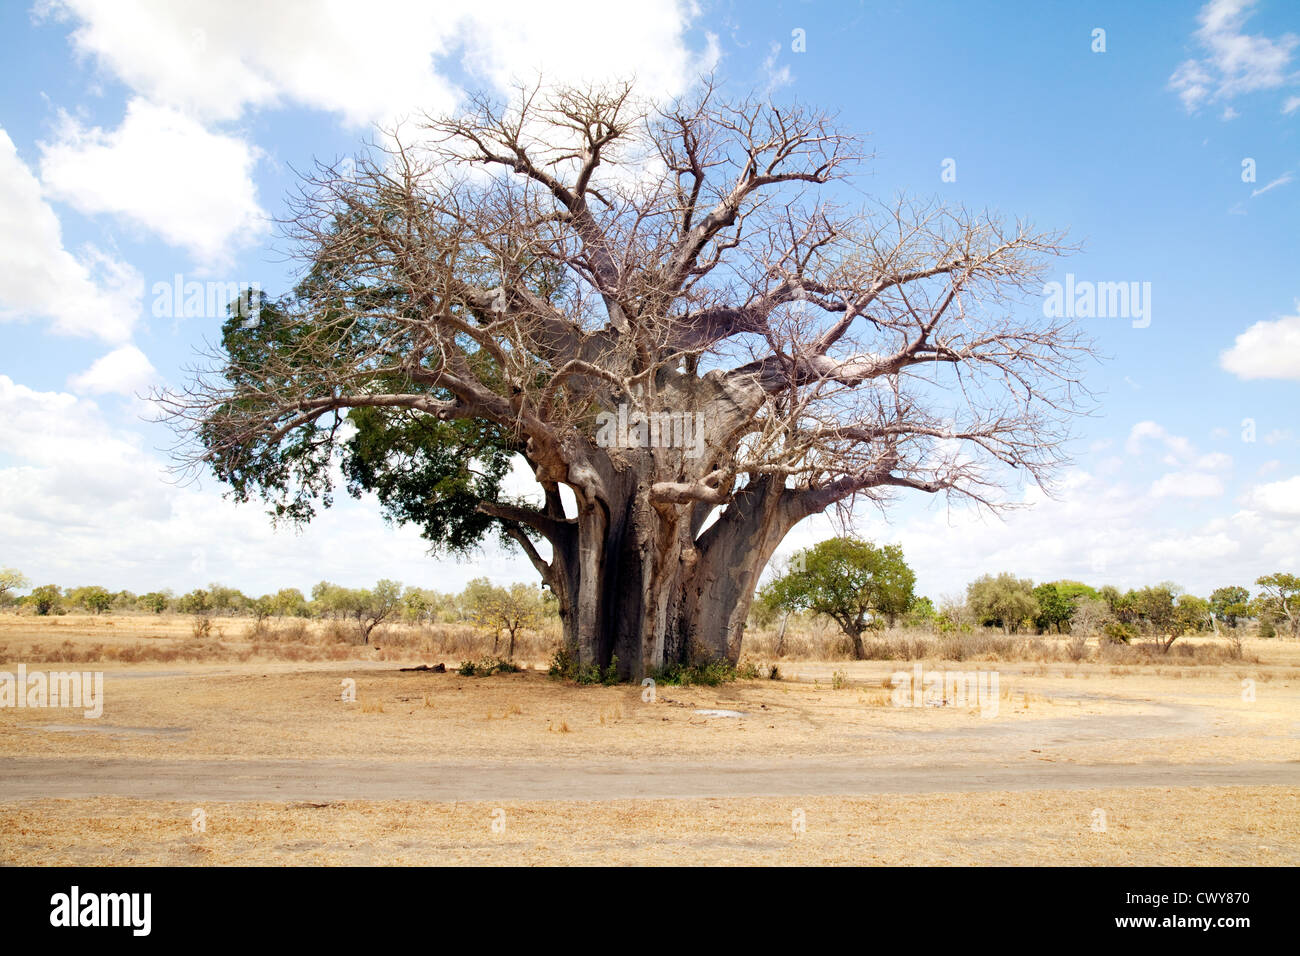 The oldest baobab tree in the Selous Game reserve at 2,600 years old, Selous game reserve Tanzania Africa Stock Photo